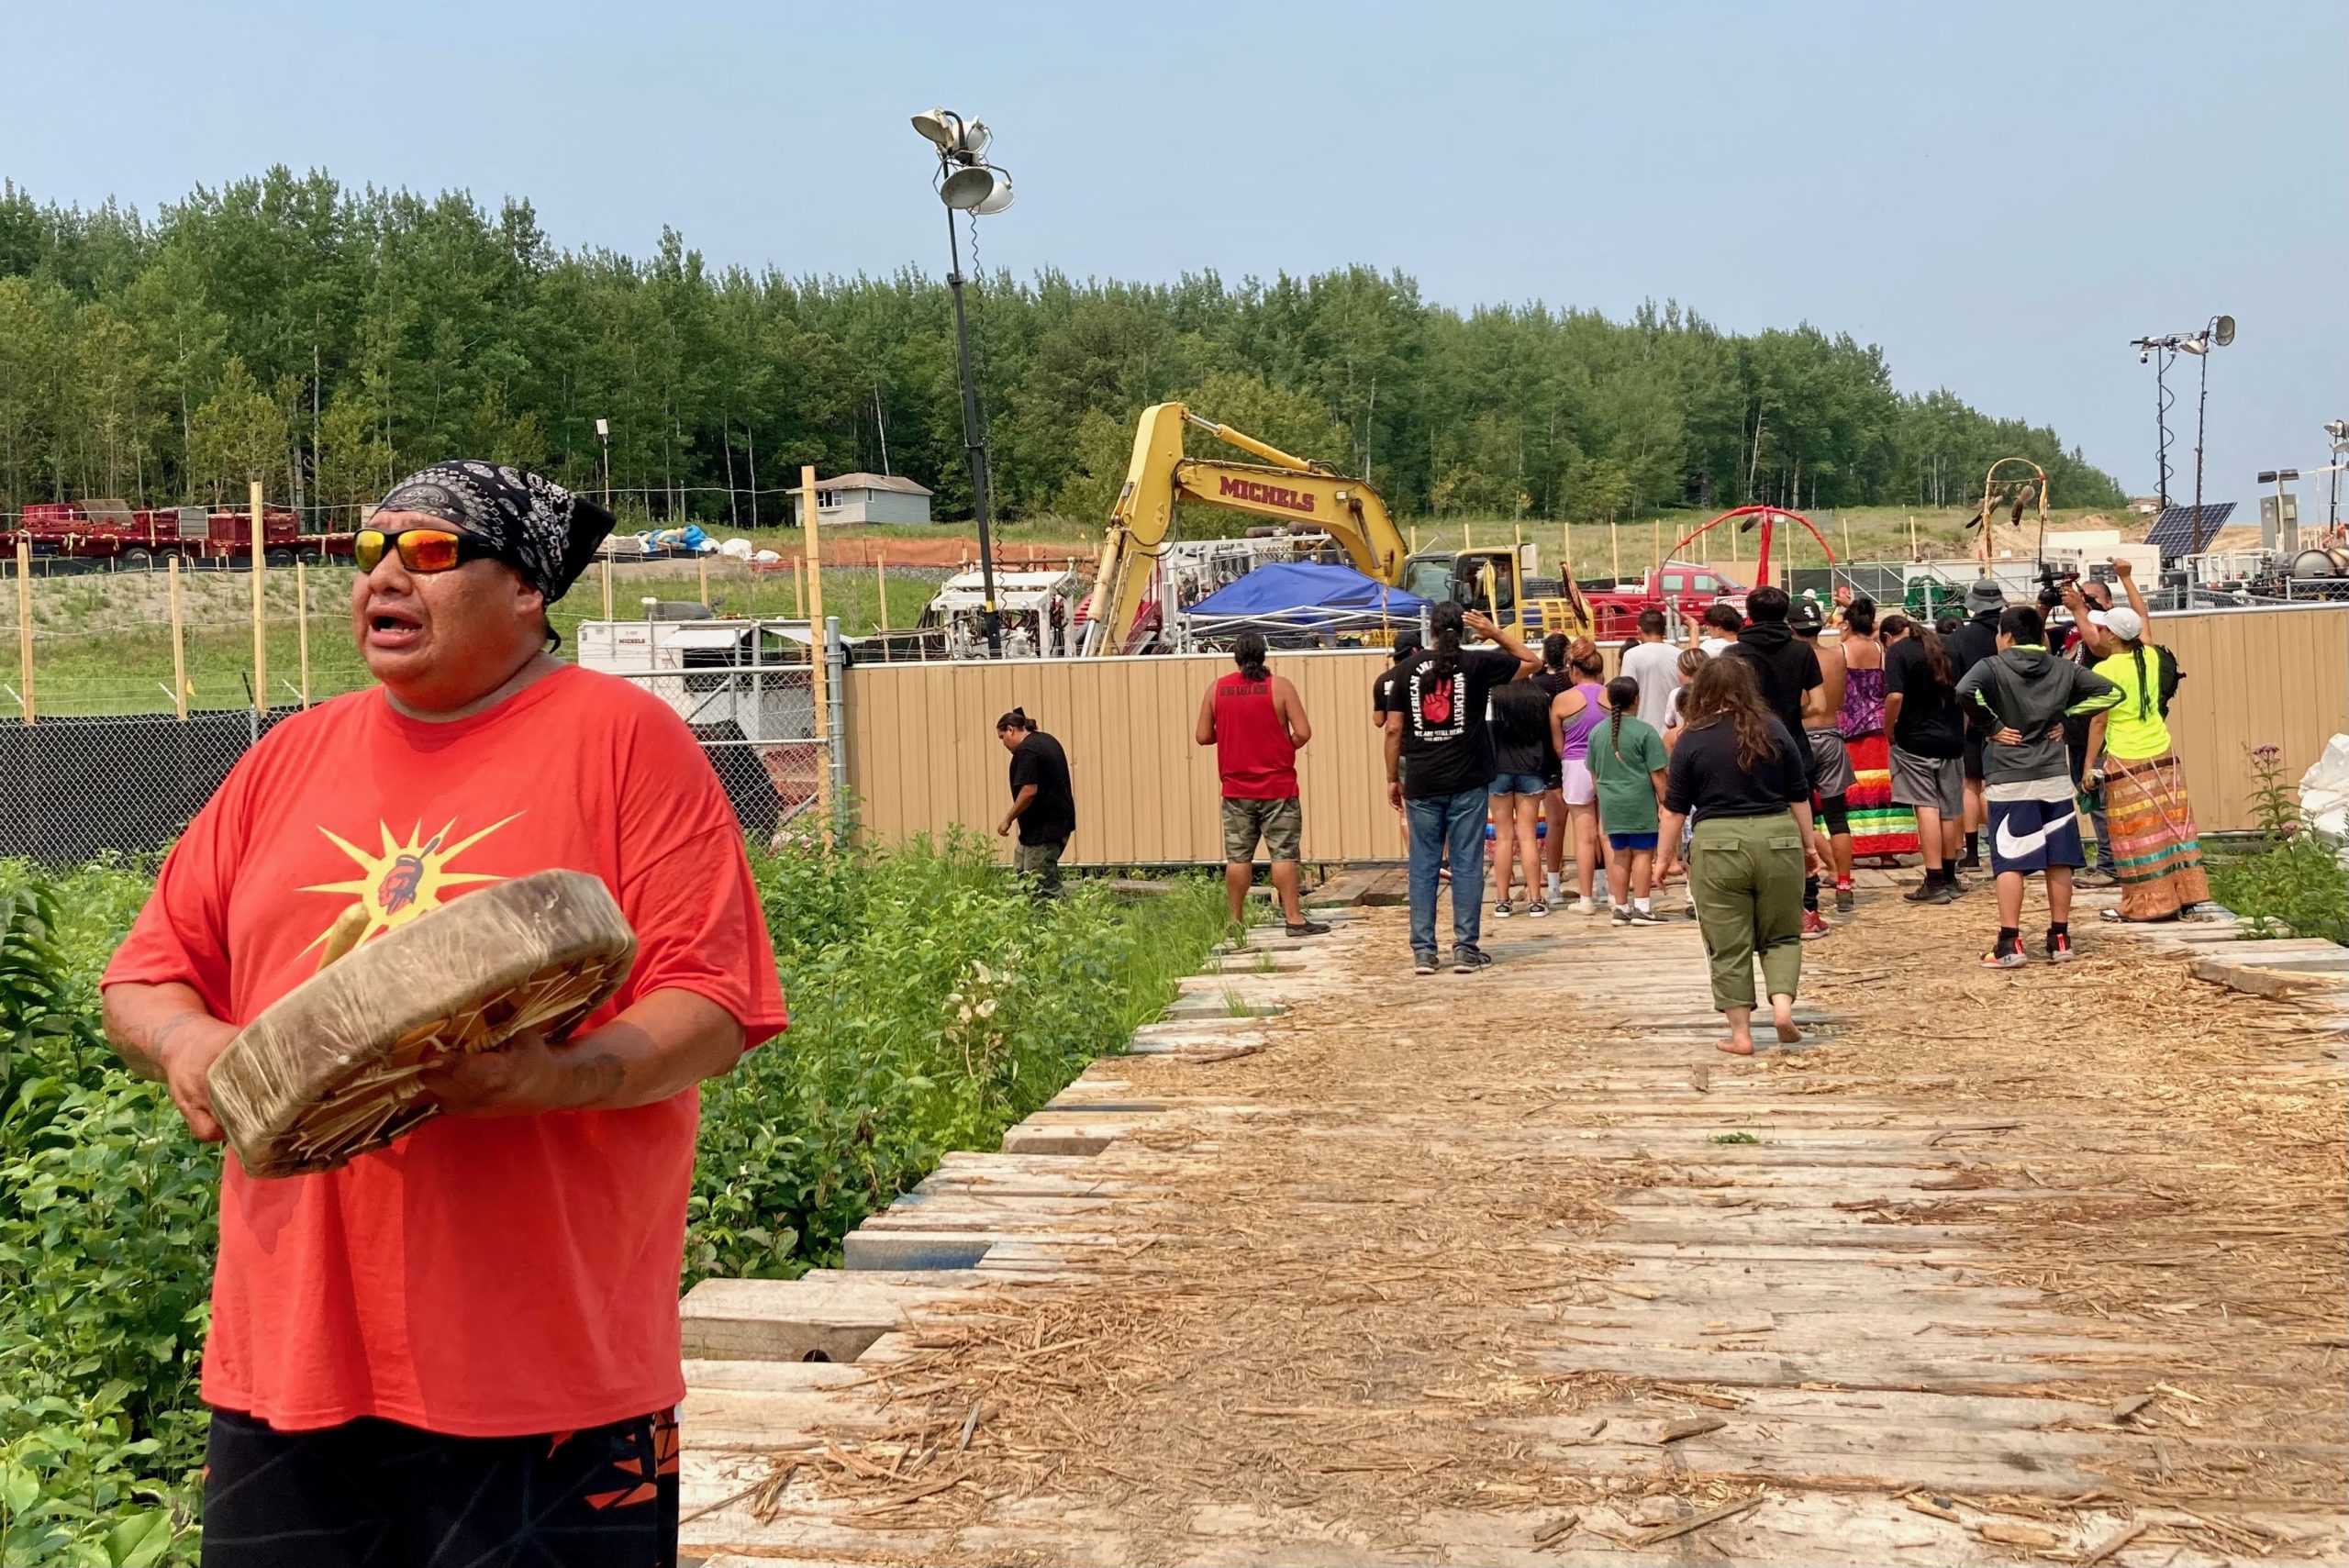 Dakota singer Hoka Wicasa sings as youth runners from Standing Rock and Cheyenne River Nations in North and South Dakota approach an Enbridge work site near Camp Firelight. The youth ran the pipeline route across Minnesota from North Dakota to Wisconsin, stopping at all of the water protector camps across the region.